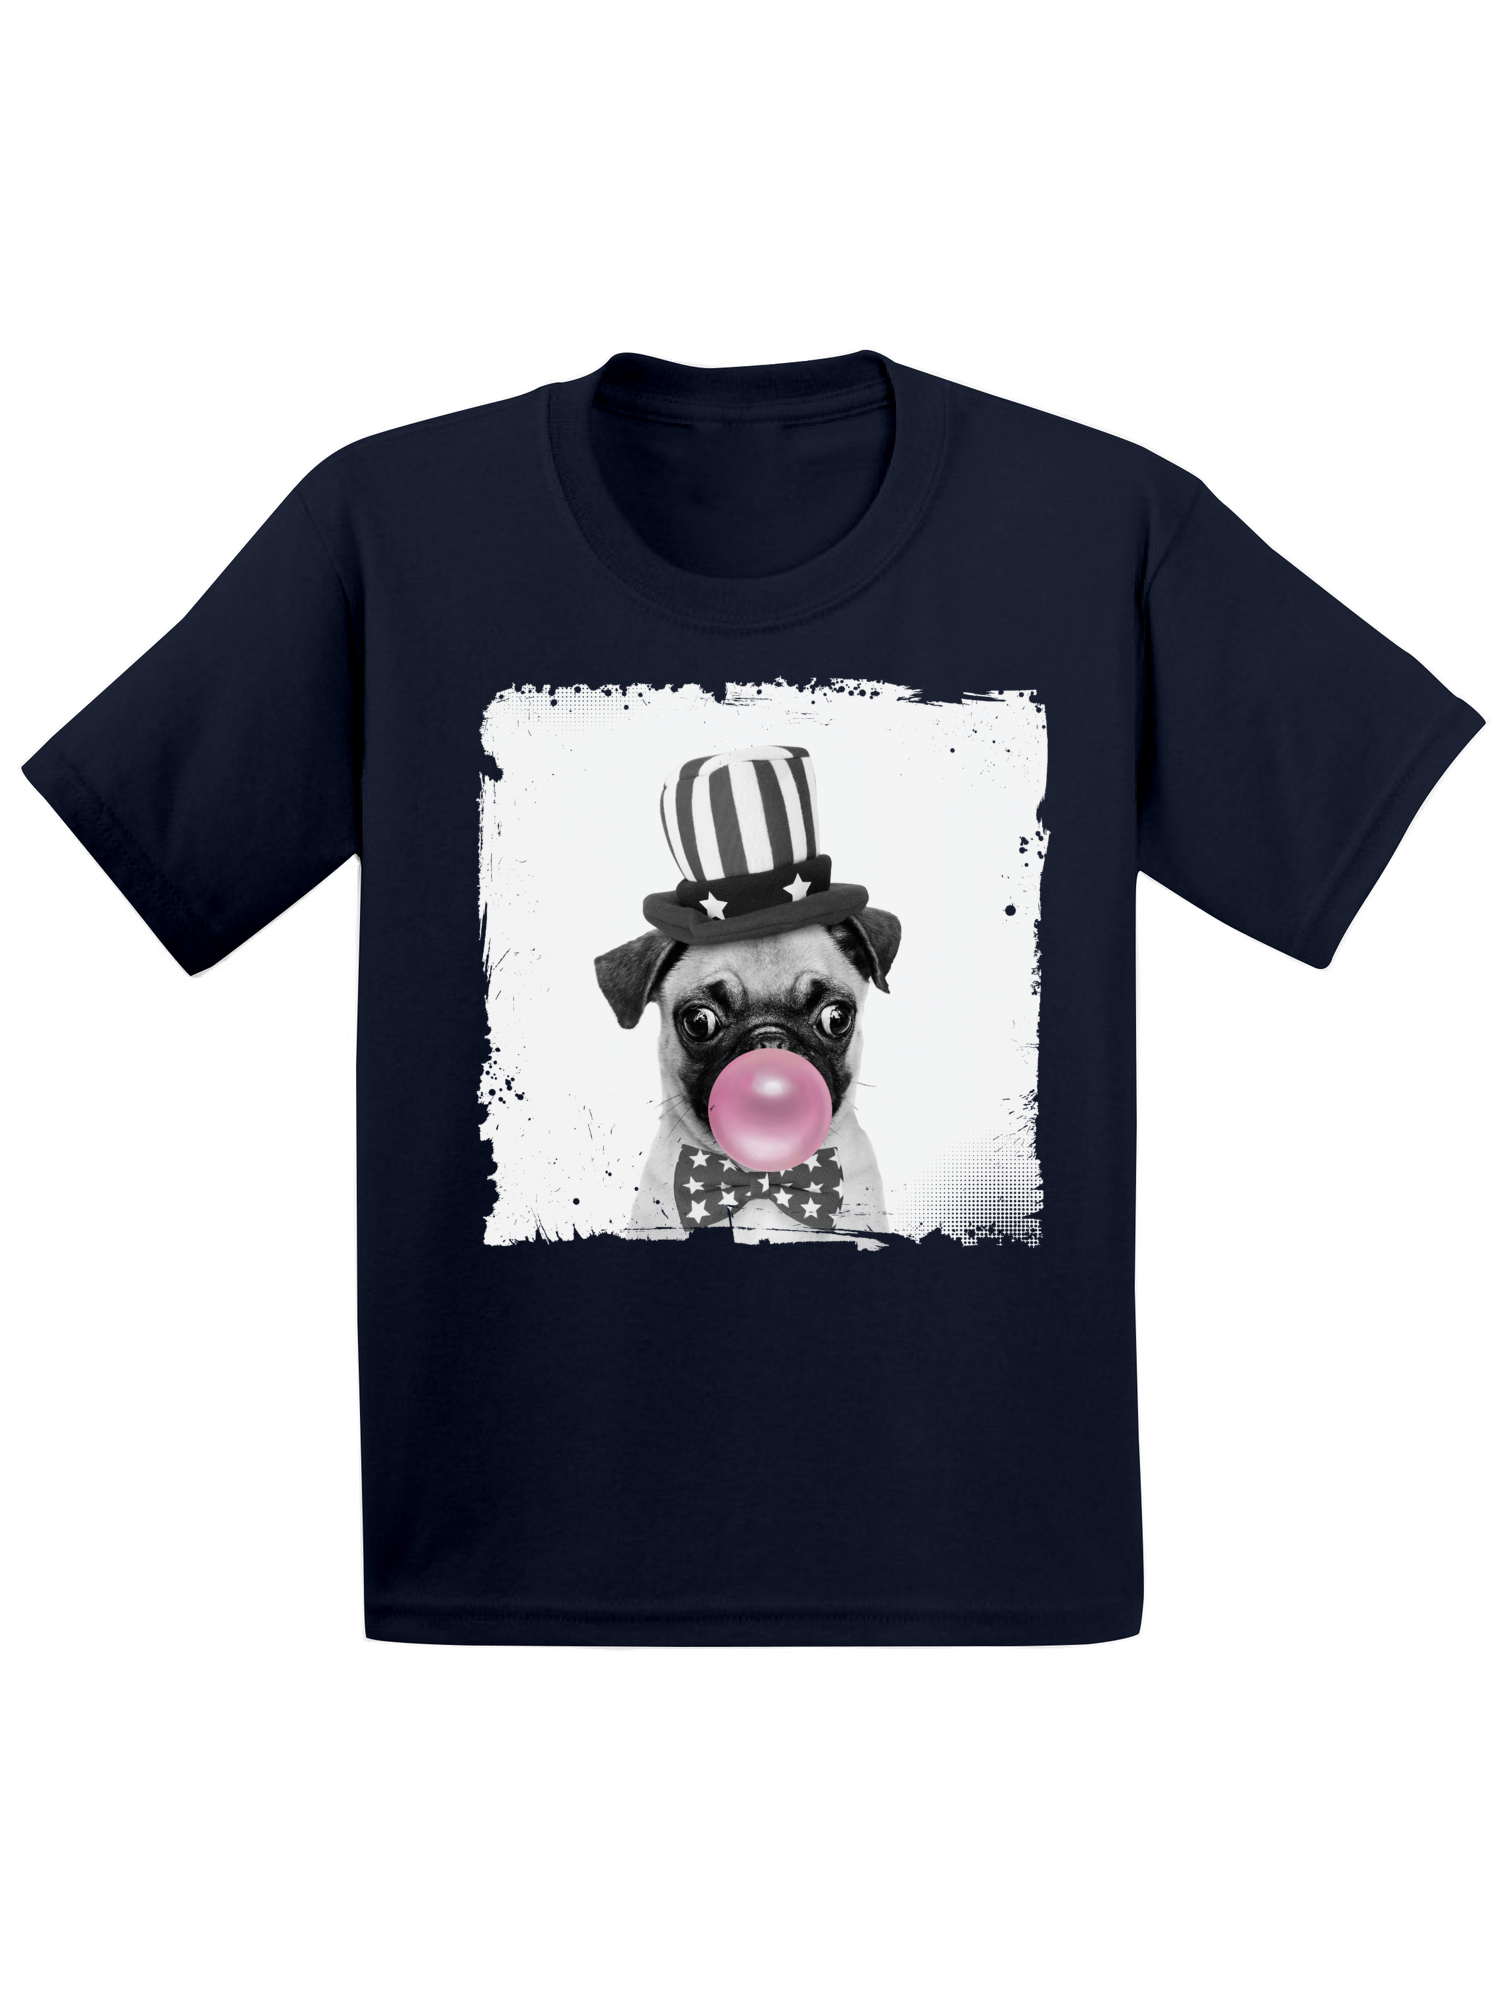 Awkward Styles Funny Pug Infant Shirt Cute Pug Shirt Animals Prints Kids T Shirt Funny Pug Infant Tshirt Cute Gifts for Children Pug Clothing Lovely Pug T Shirt Pug Lovers Funny Gifts for Kids - image 1 of 4